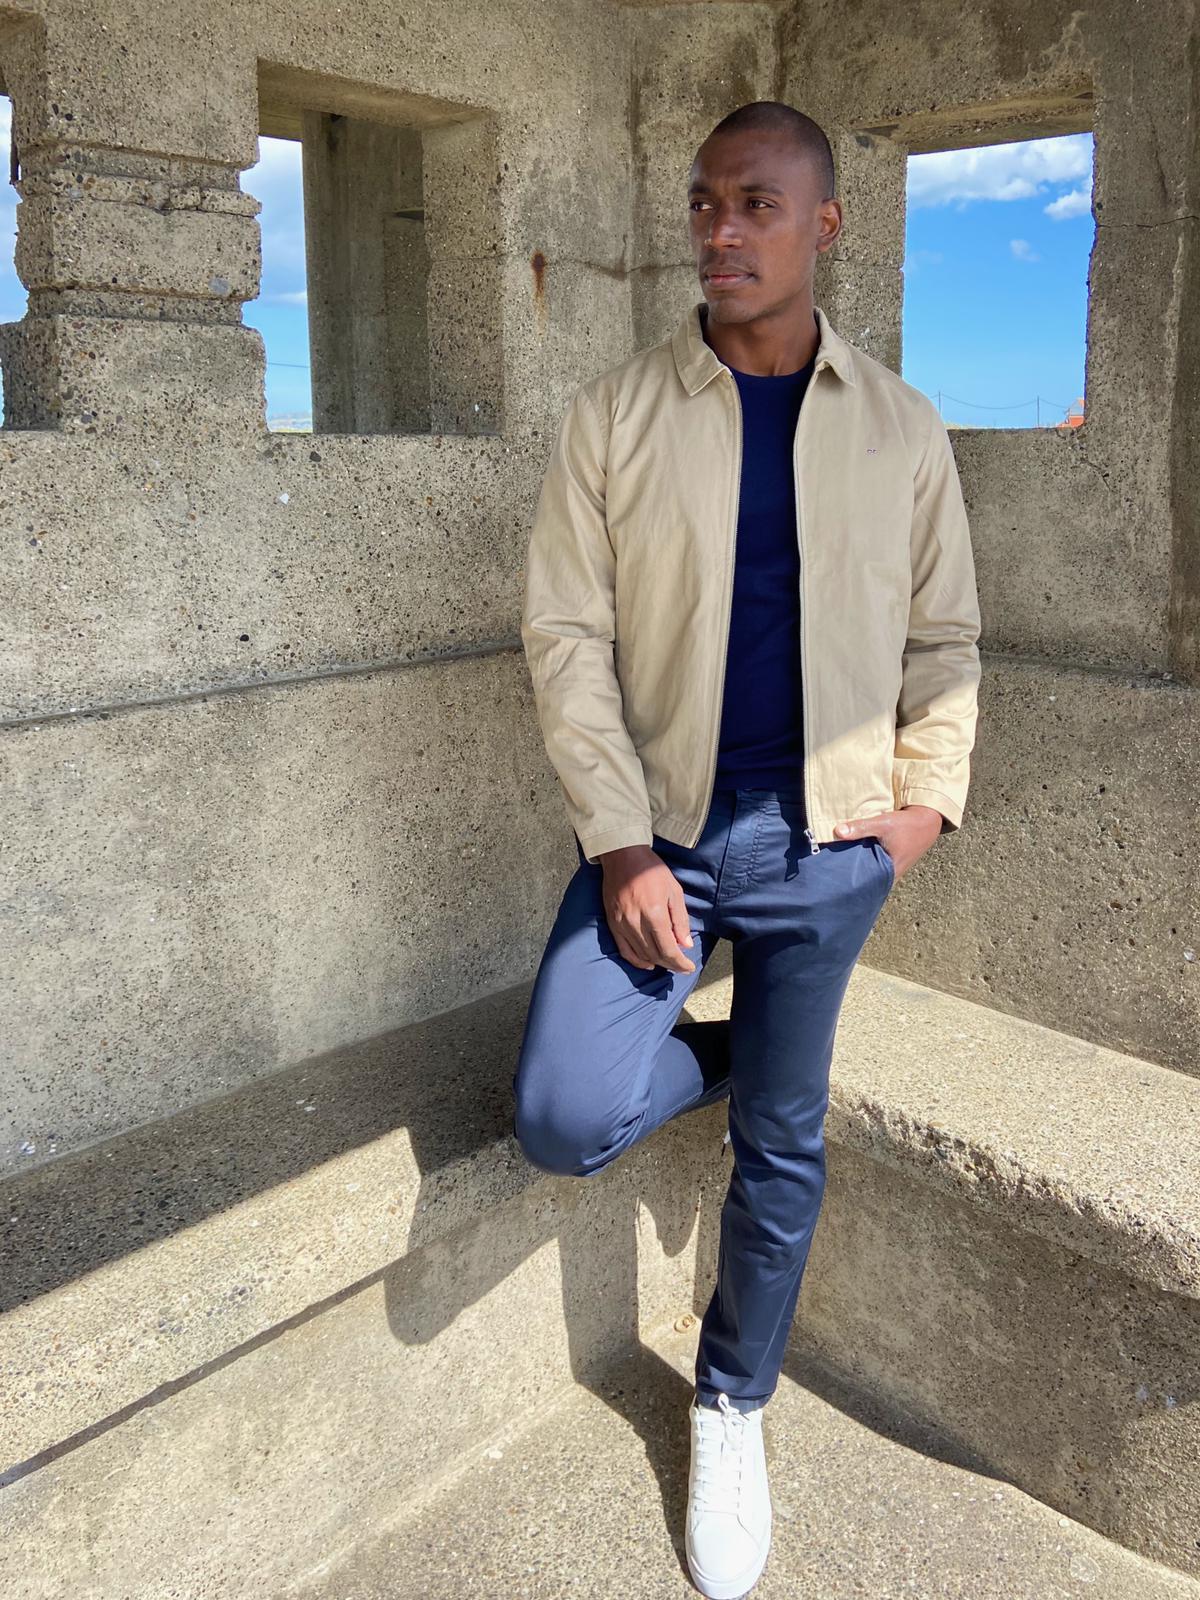 Men’s Water-Resistant Beige Cotton Zip Jacket with Long Sleeves and a collar from Eden Park Paris, Mish Mash Dark Navy Cotton Chinos, Eden Park Navy Cotton Crew Neck T-Shirt and GANT White Leather trainers available at StylishGuy Menswear Ireland